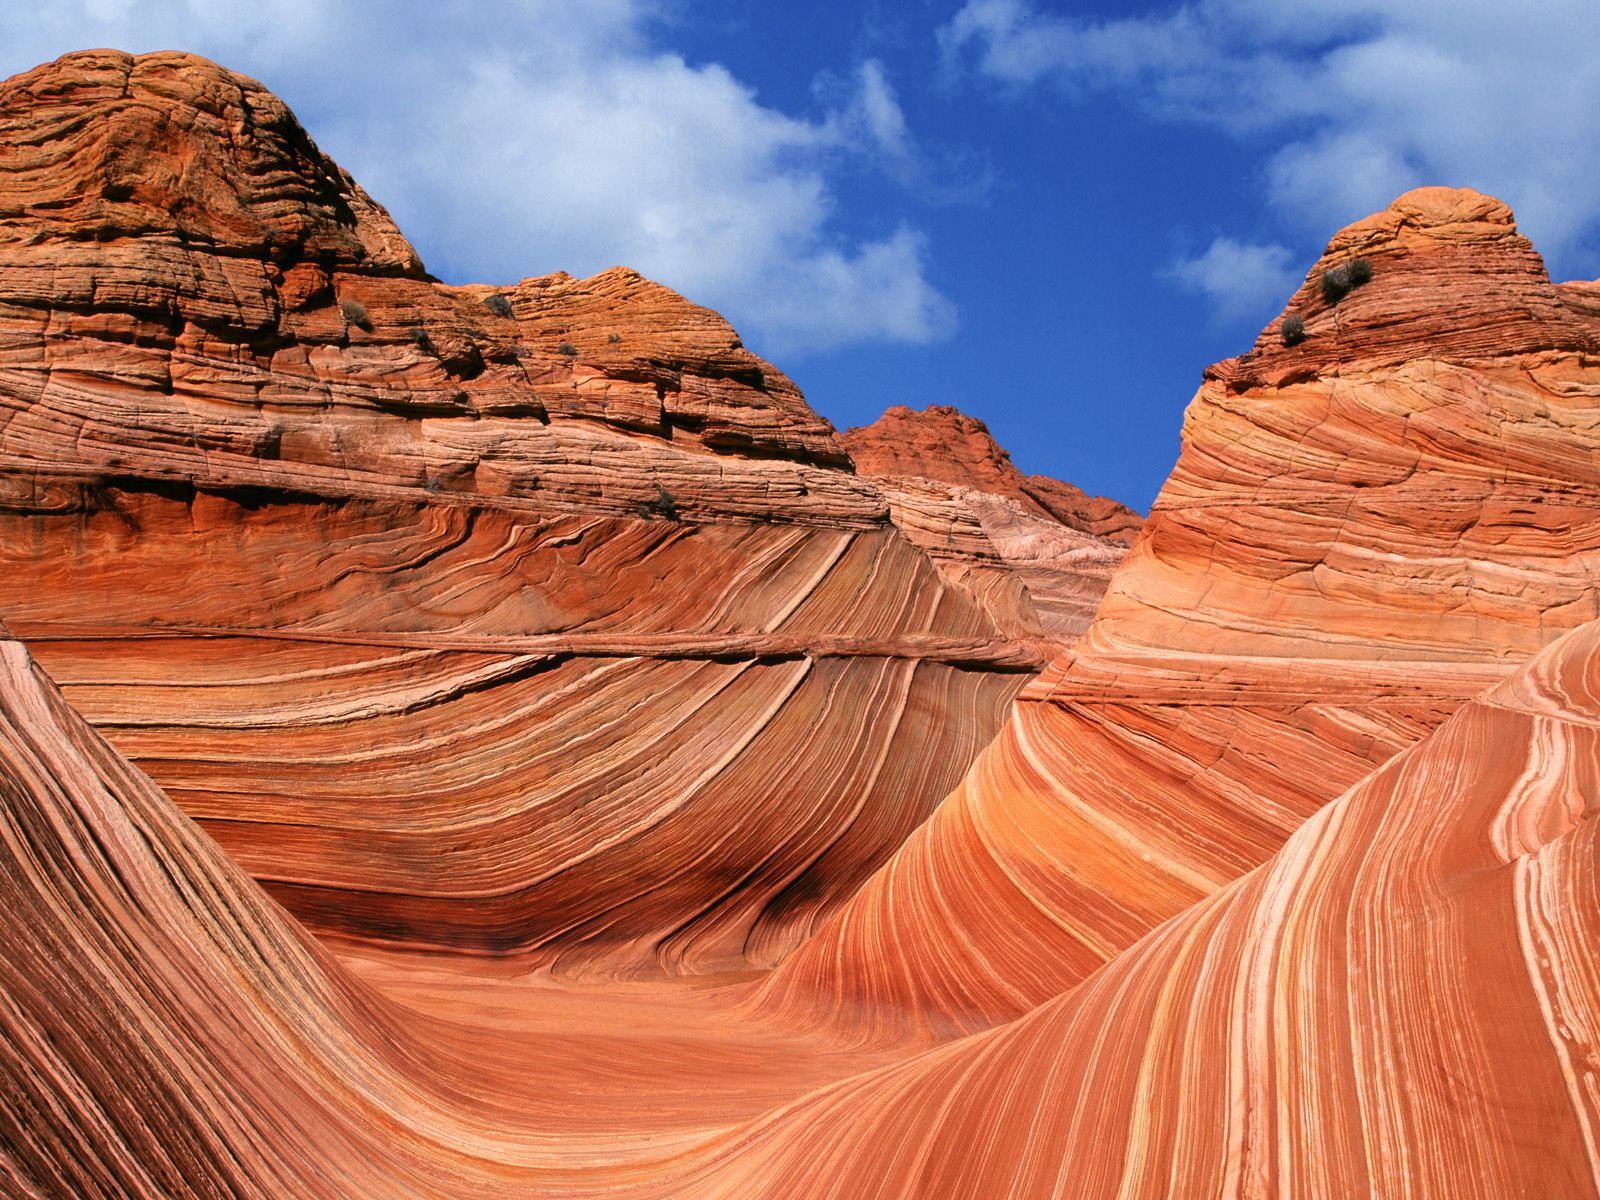 What A Wonderful World: The Wave, Coyote Buttes, Arizona USA